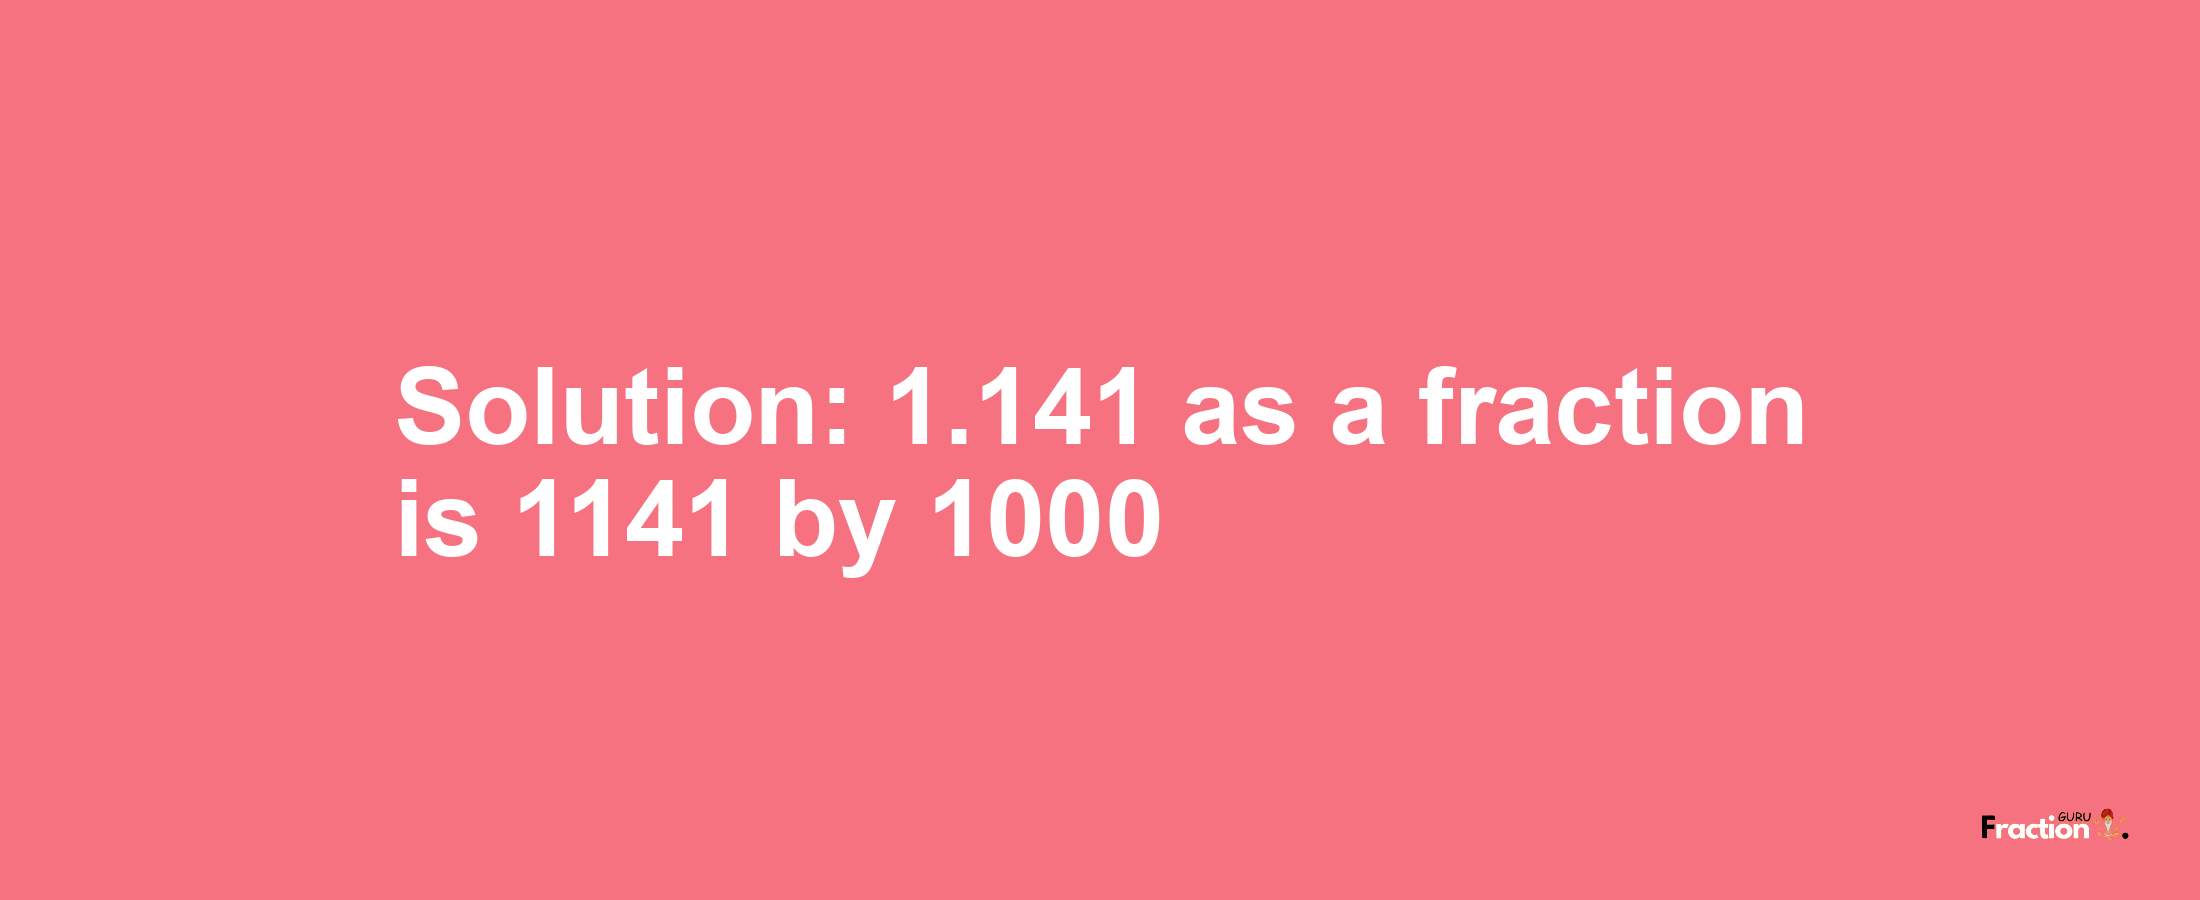 Solution:1.141 as a fraction is 1141/1000